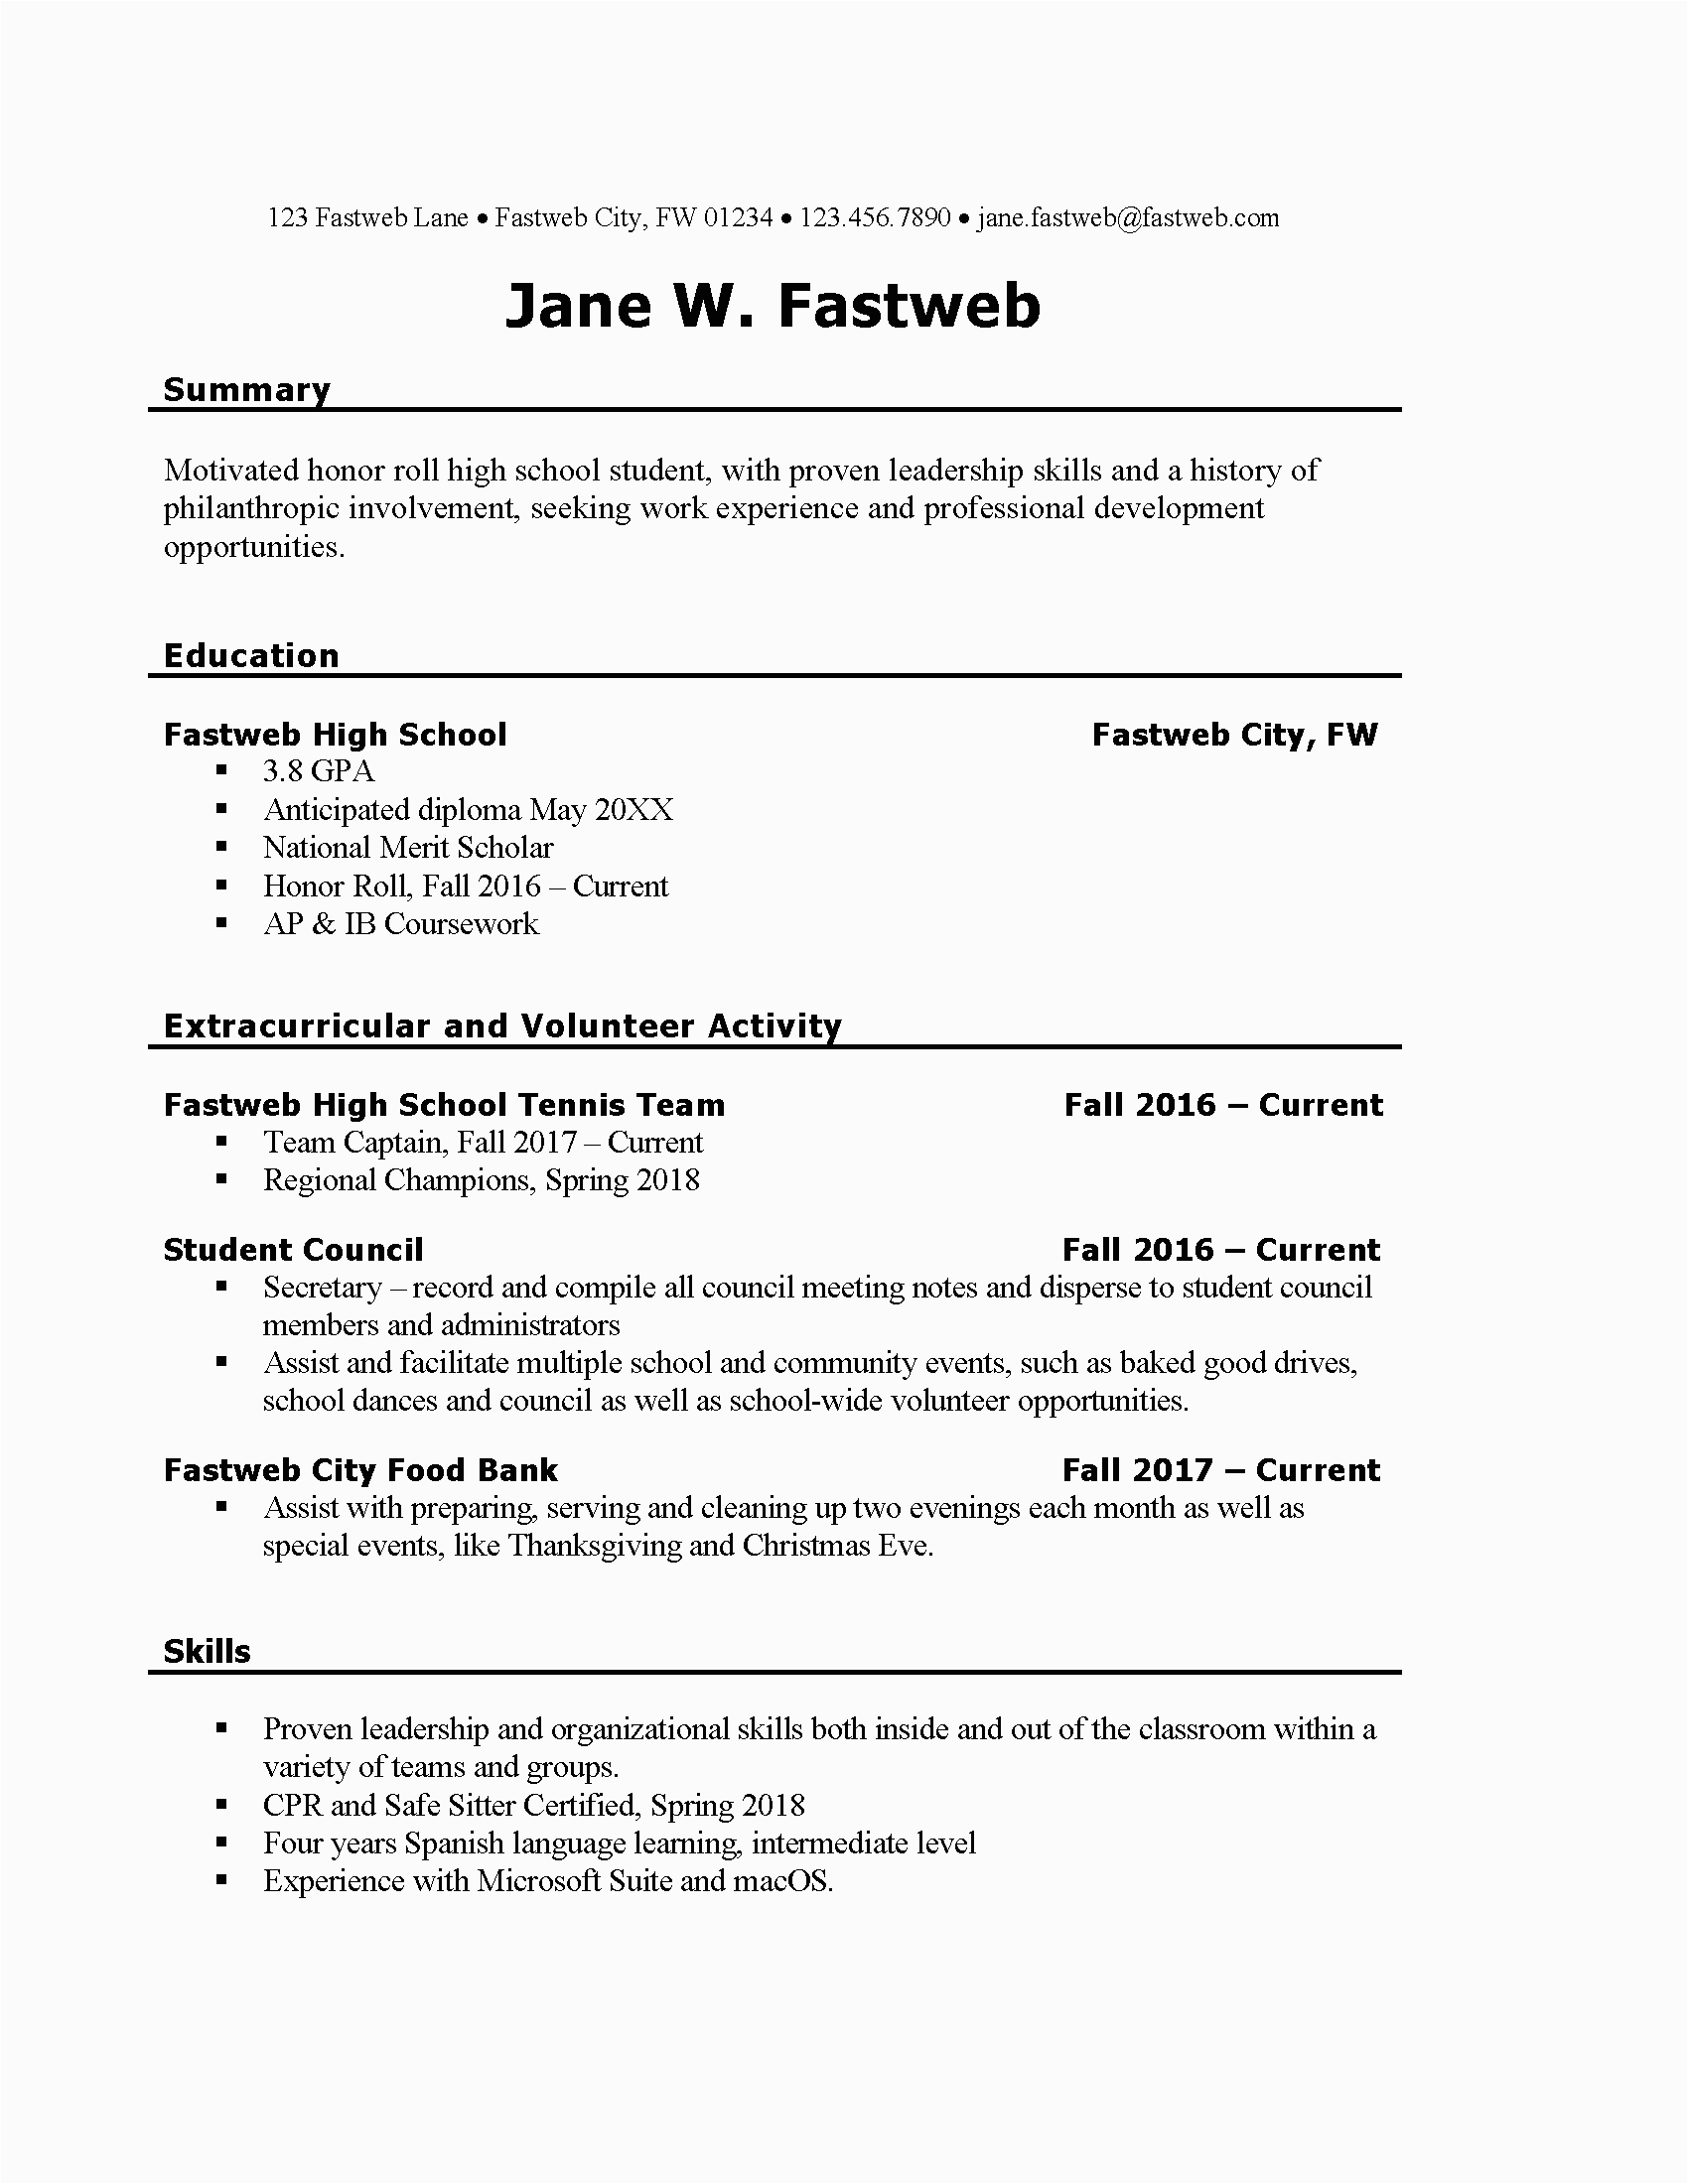 Resume Template for Students First Job First Part Time Job Resume Sample